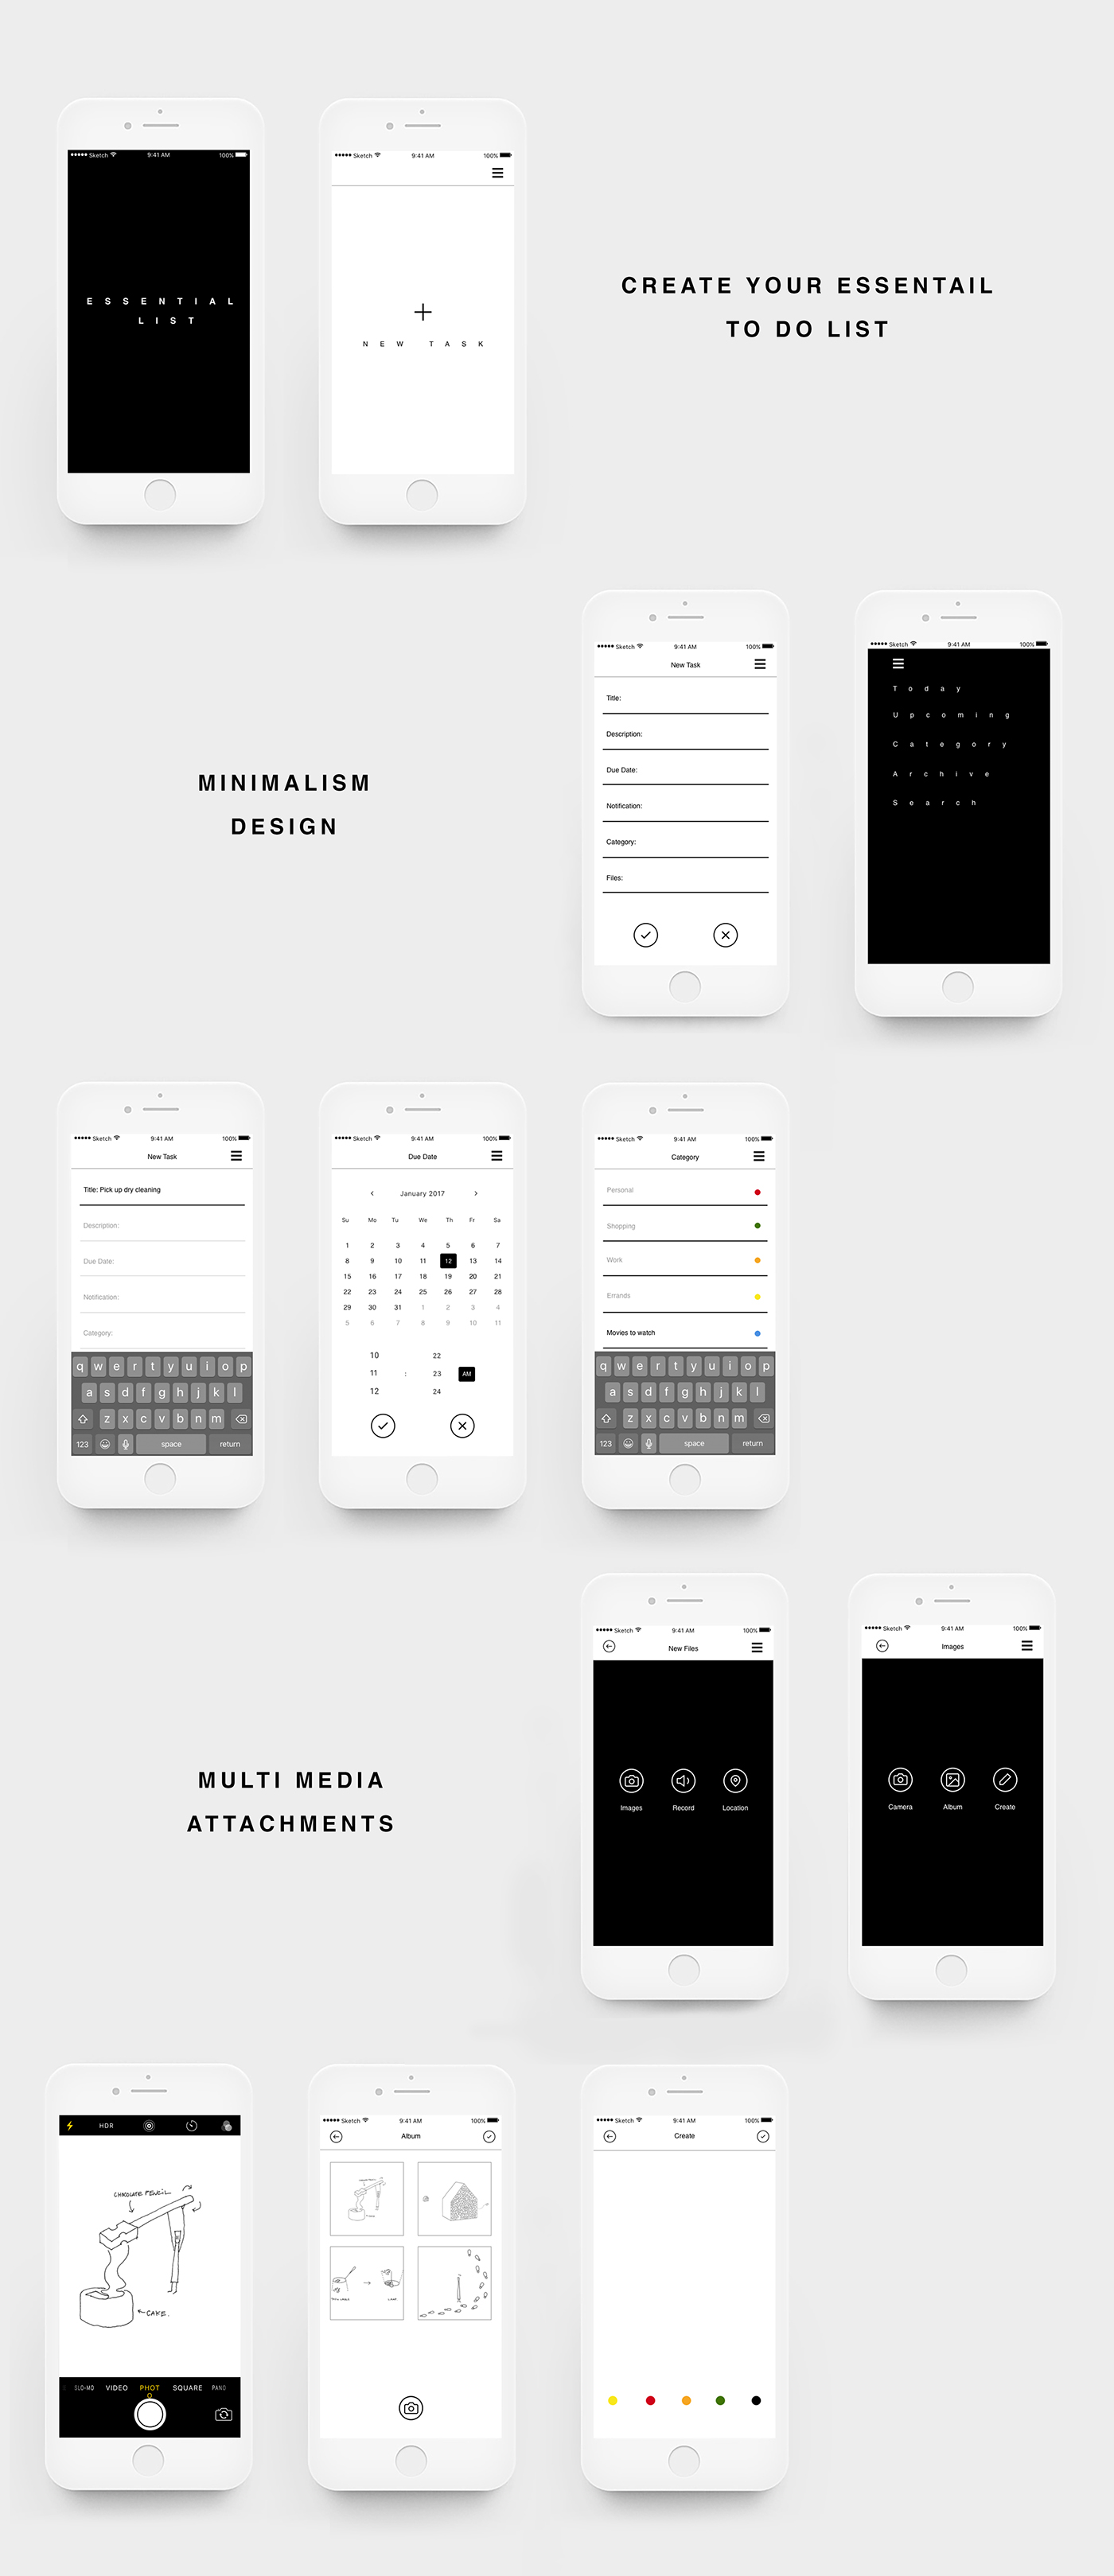 to do list essential Minimalism black and white redesign